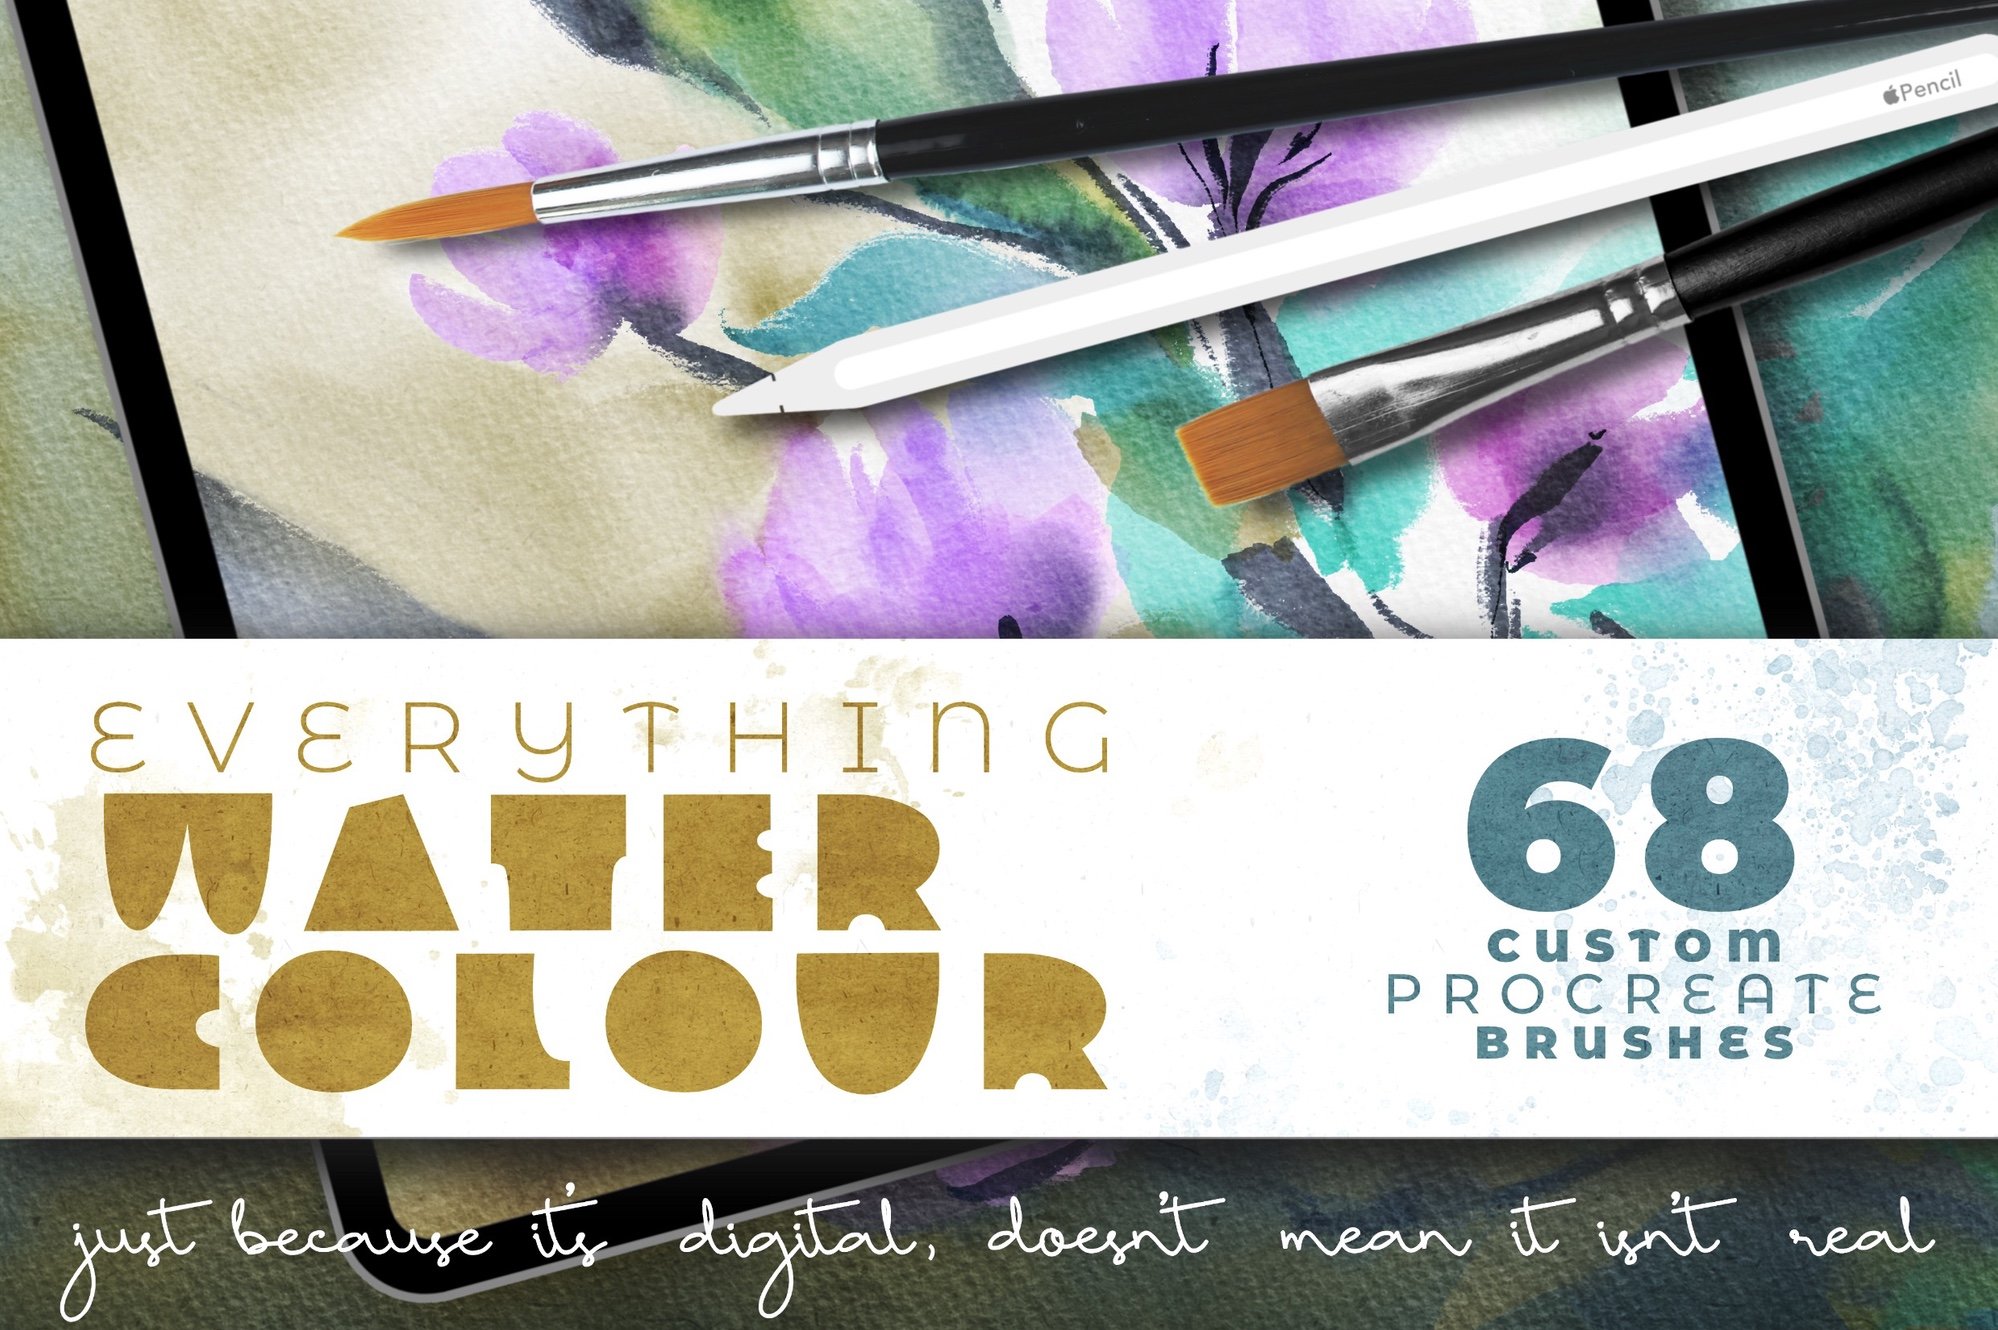 30 Best Procreate Brushes to Download in 2020